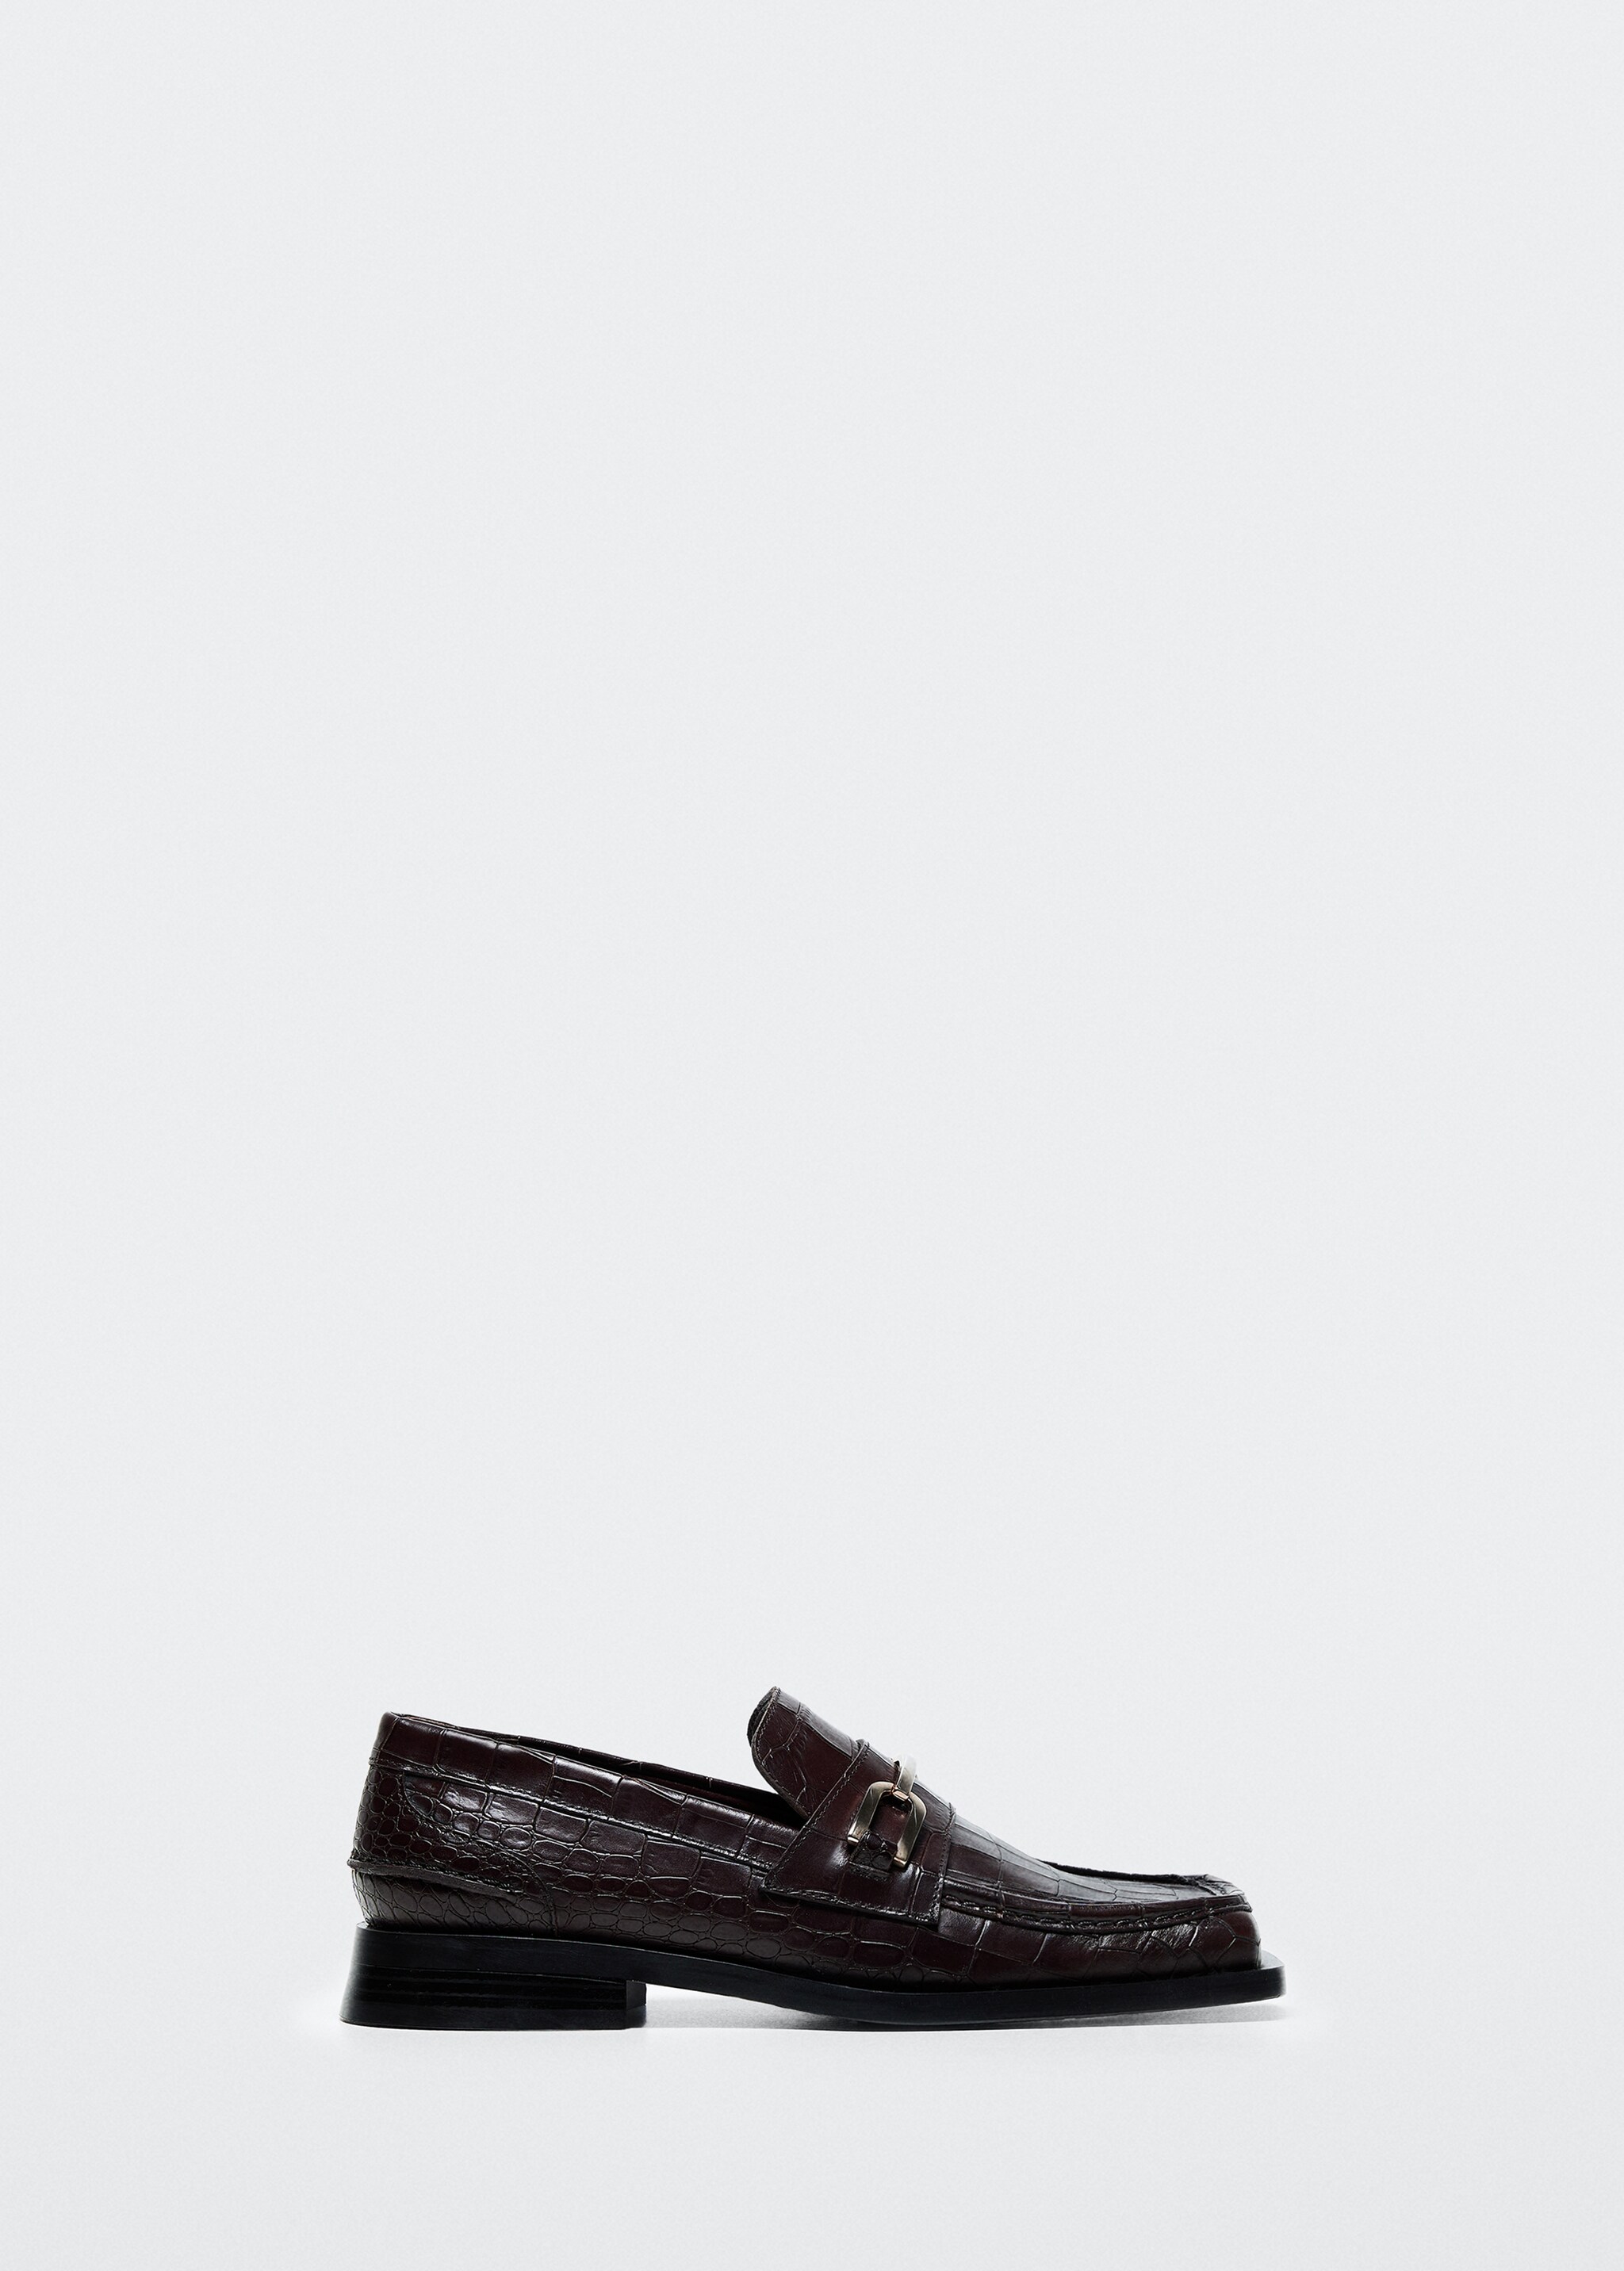 Square-toe leather loafers - Article without model